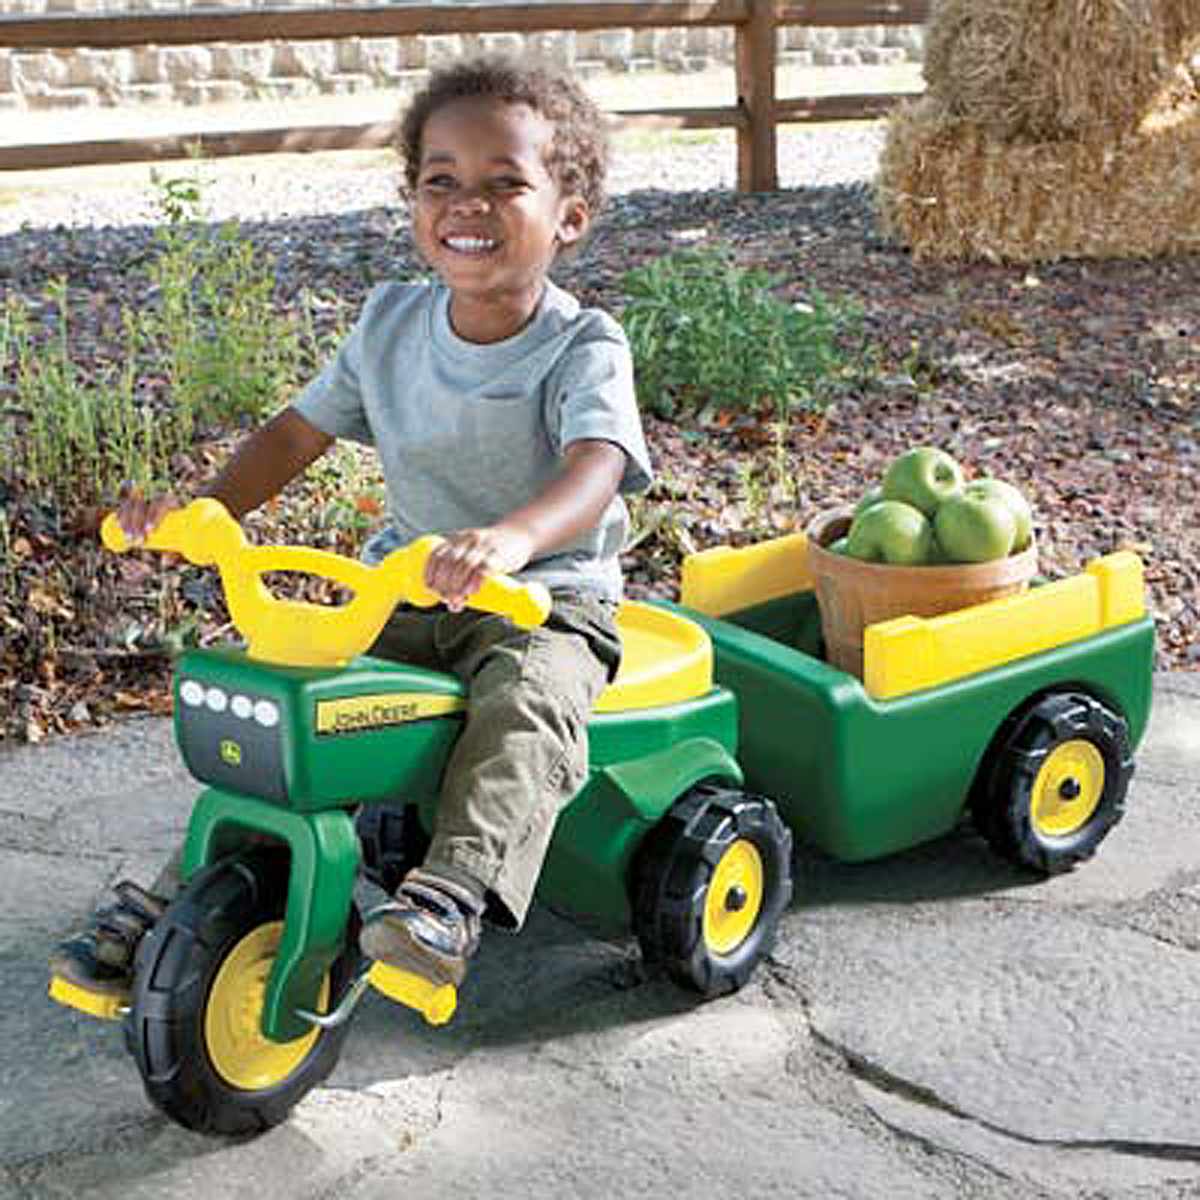 John Deere Plastic Trike with Cart Pedal Powered Durable Construction For 3y+ 